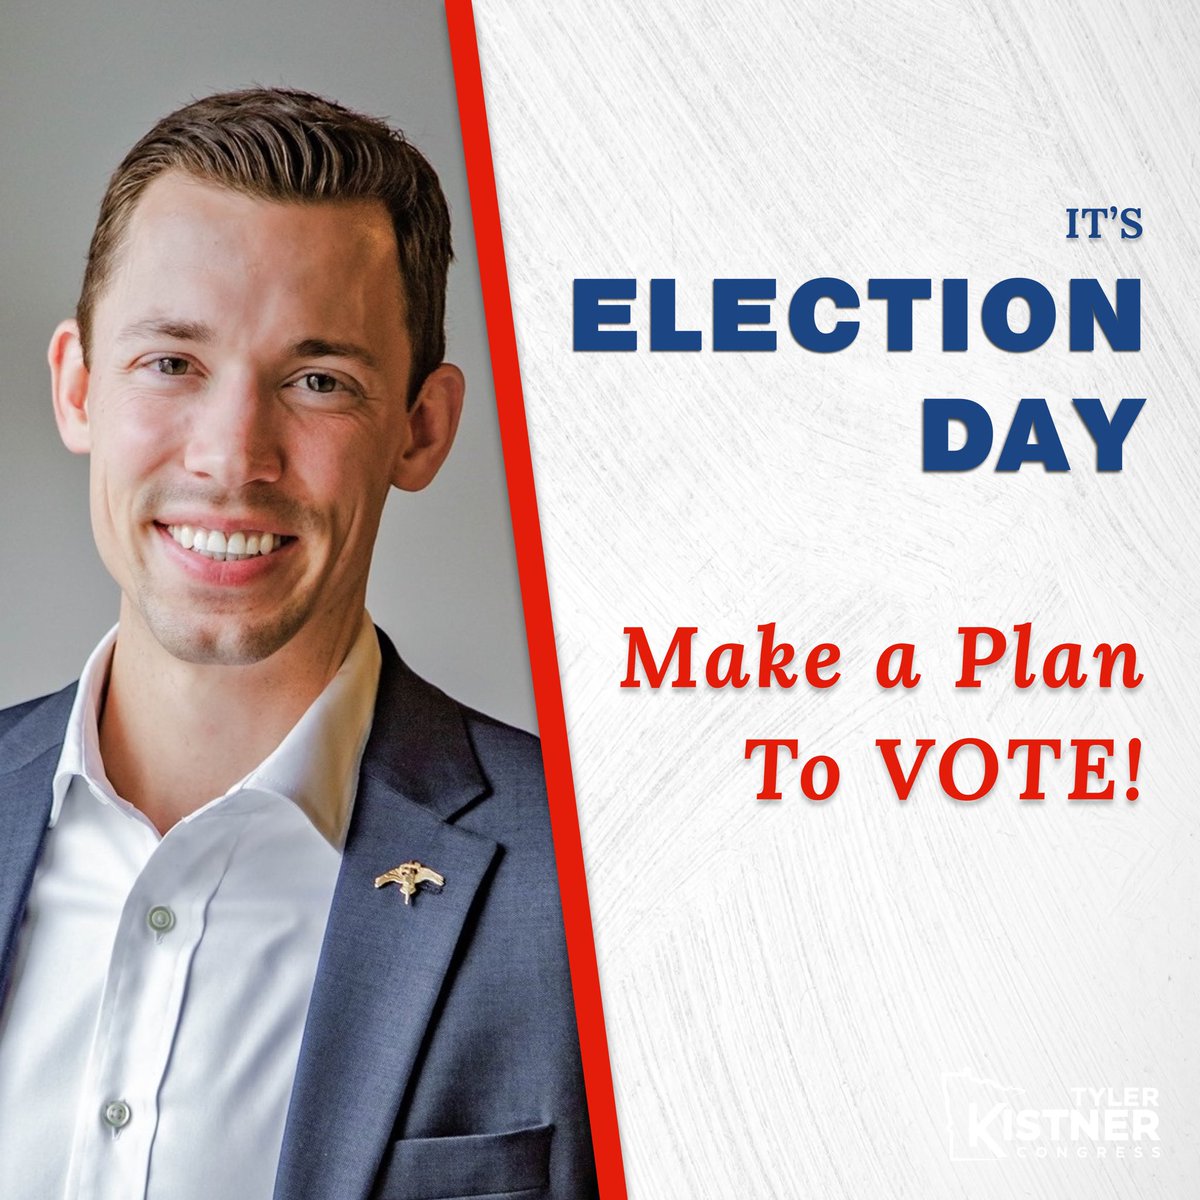 It’s Election Day here in Minnesota! Make sure you, your family, and your friends all make a plan to get out to the polls before 8 PM! #MN02